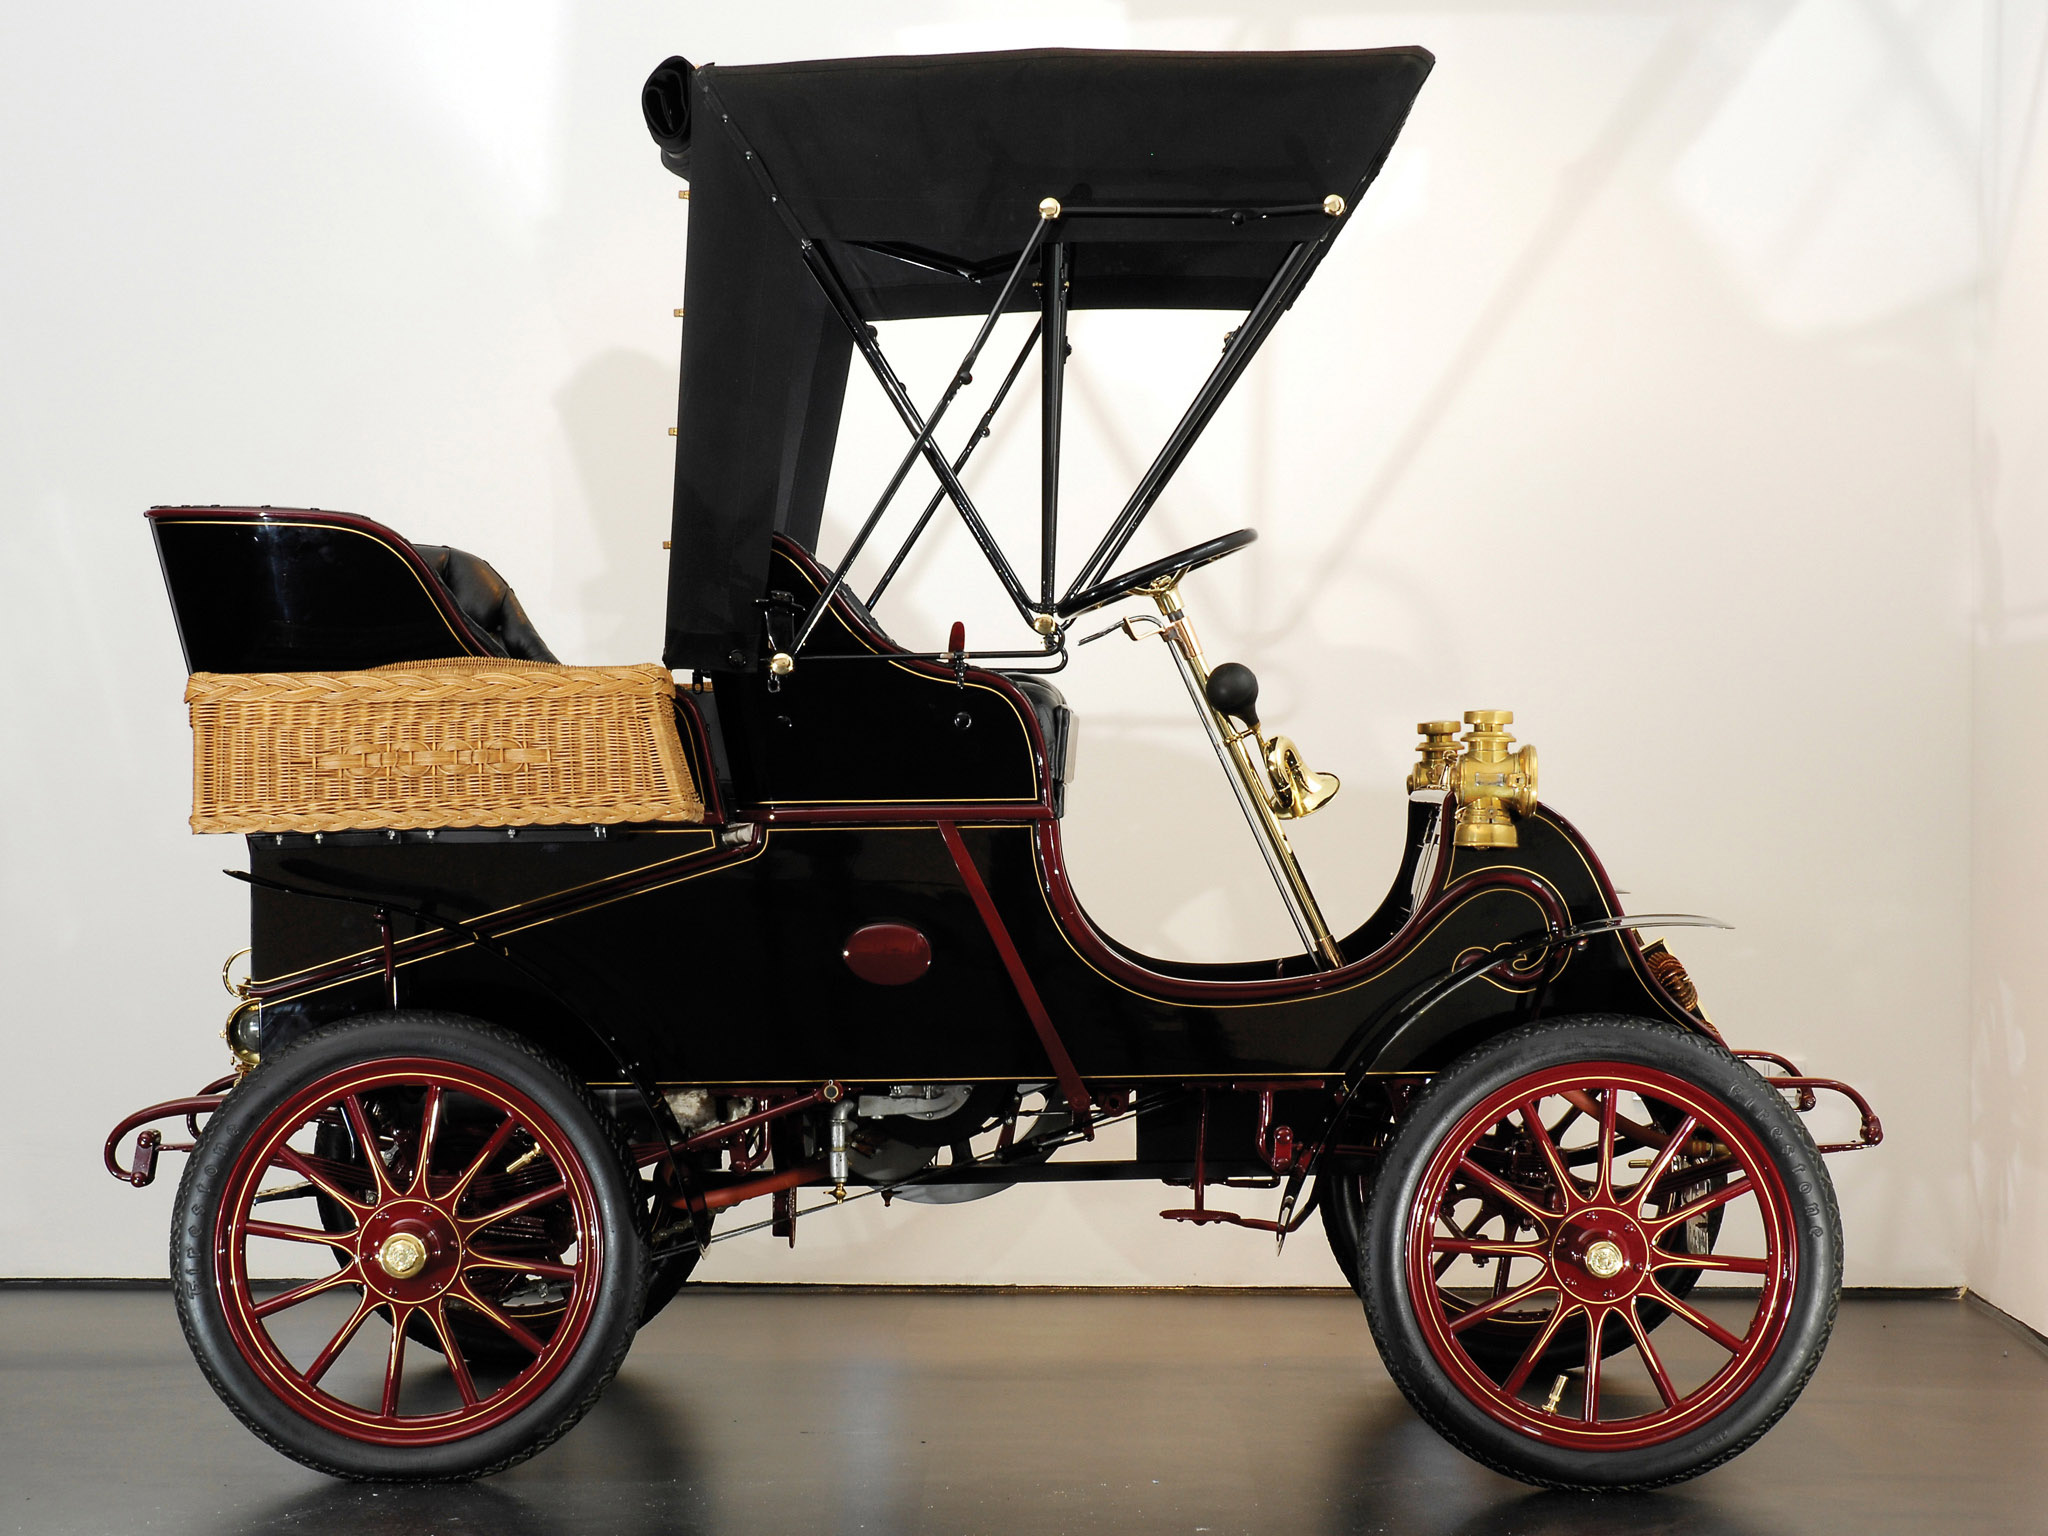 Cadillac model a Runabout (1902)